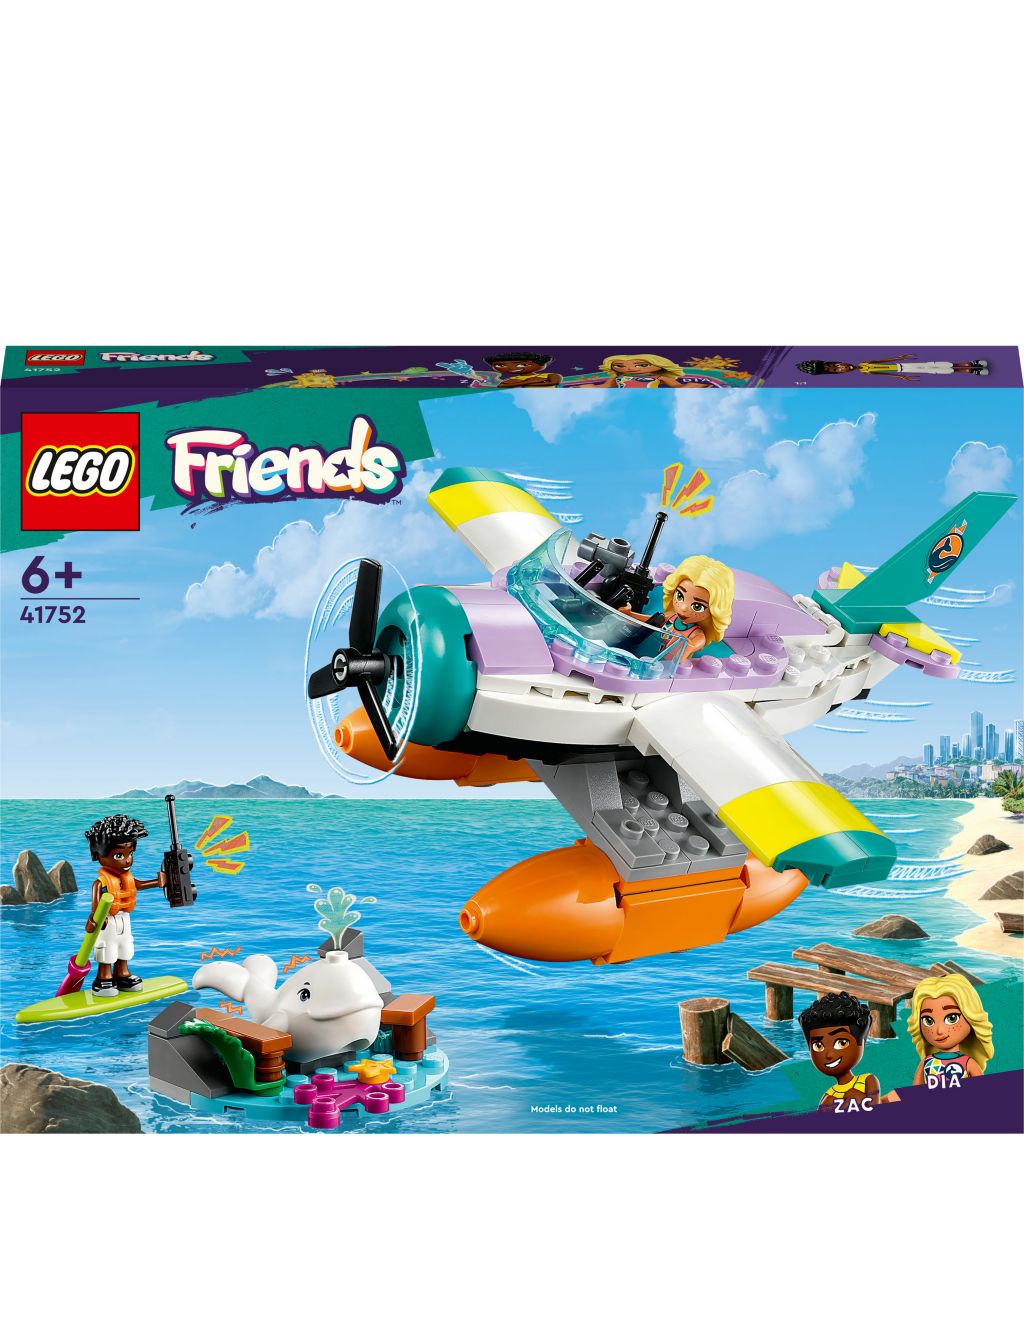 LEGO Friends Sea Rescue Plane Toy Playset (6+ Yrs) image 3